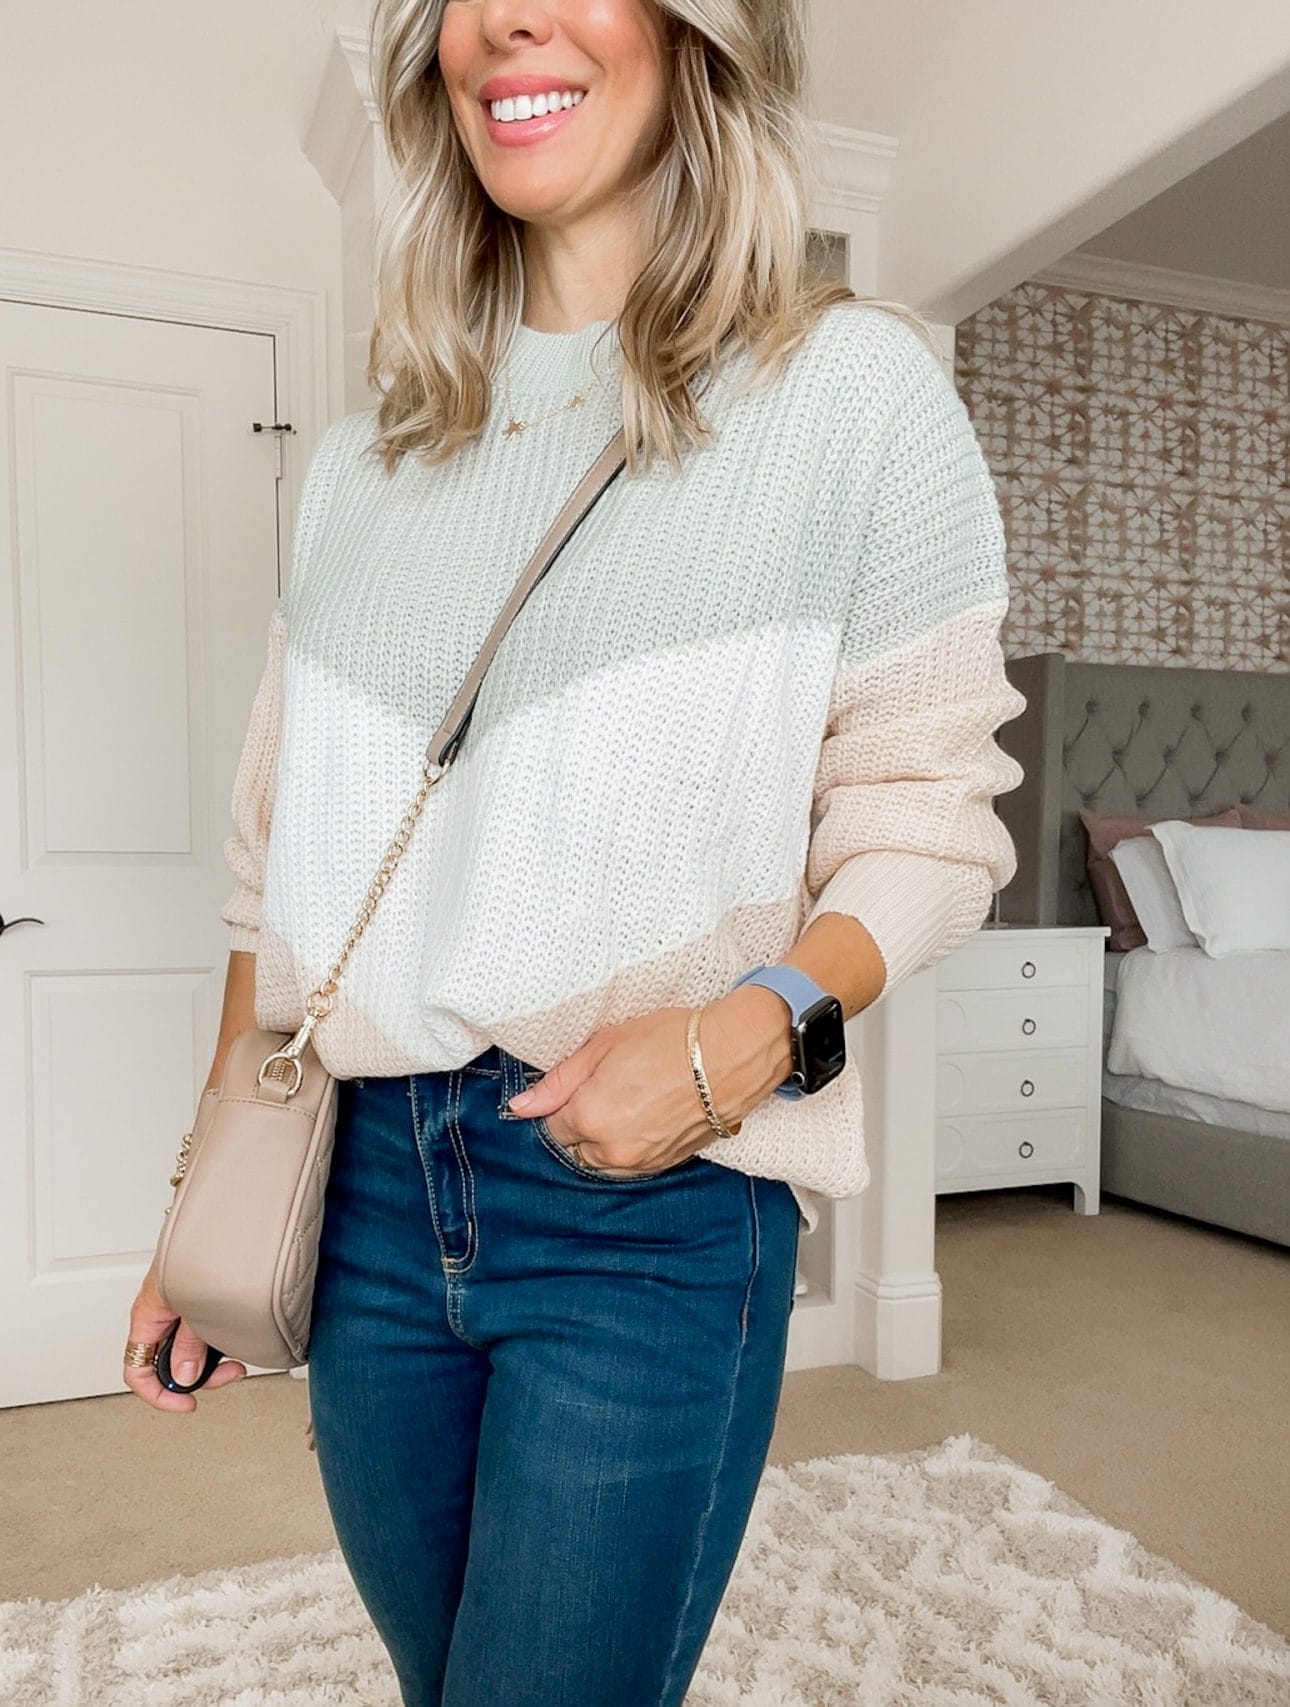 Amazon Fashion Finds, Colorblock Sweater, Jeans, Booties, Quilted Crossbody